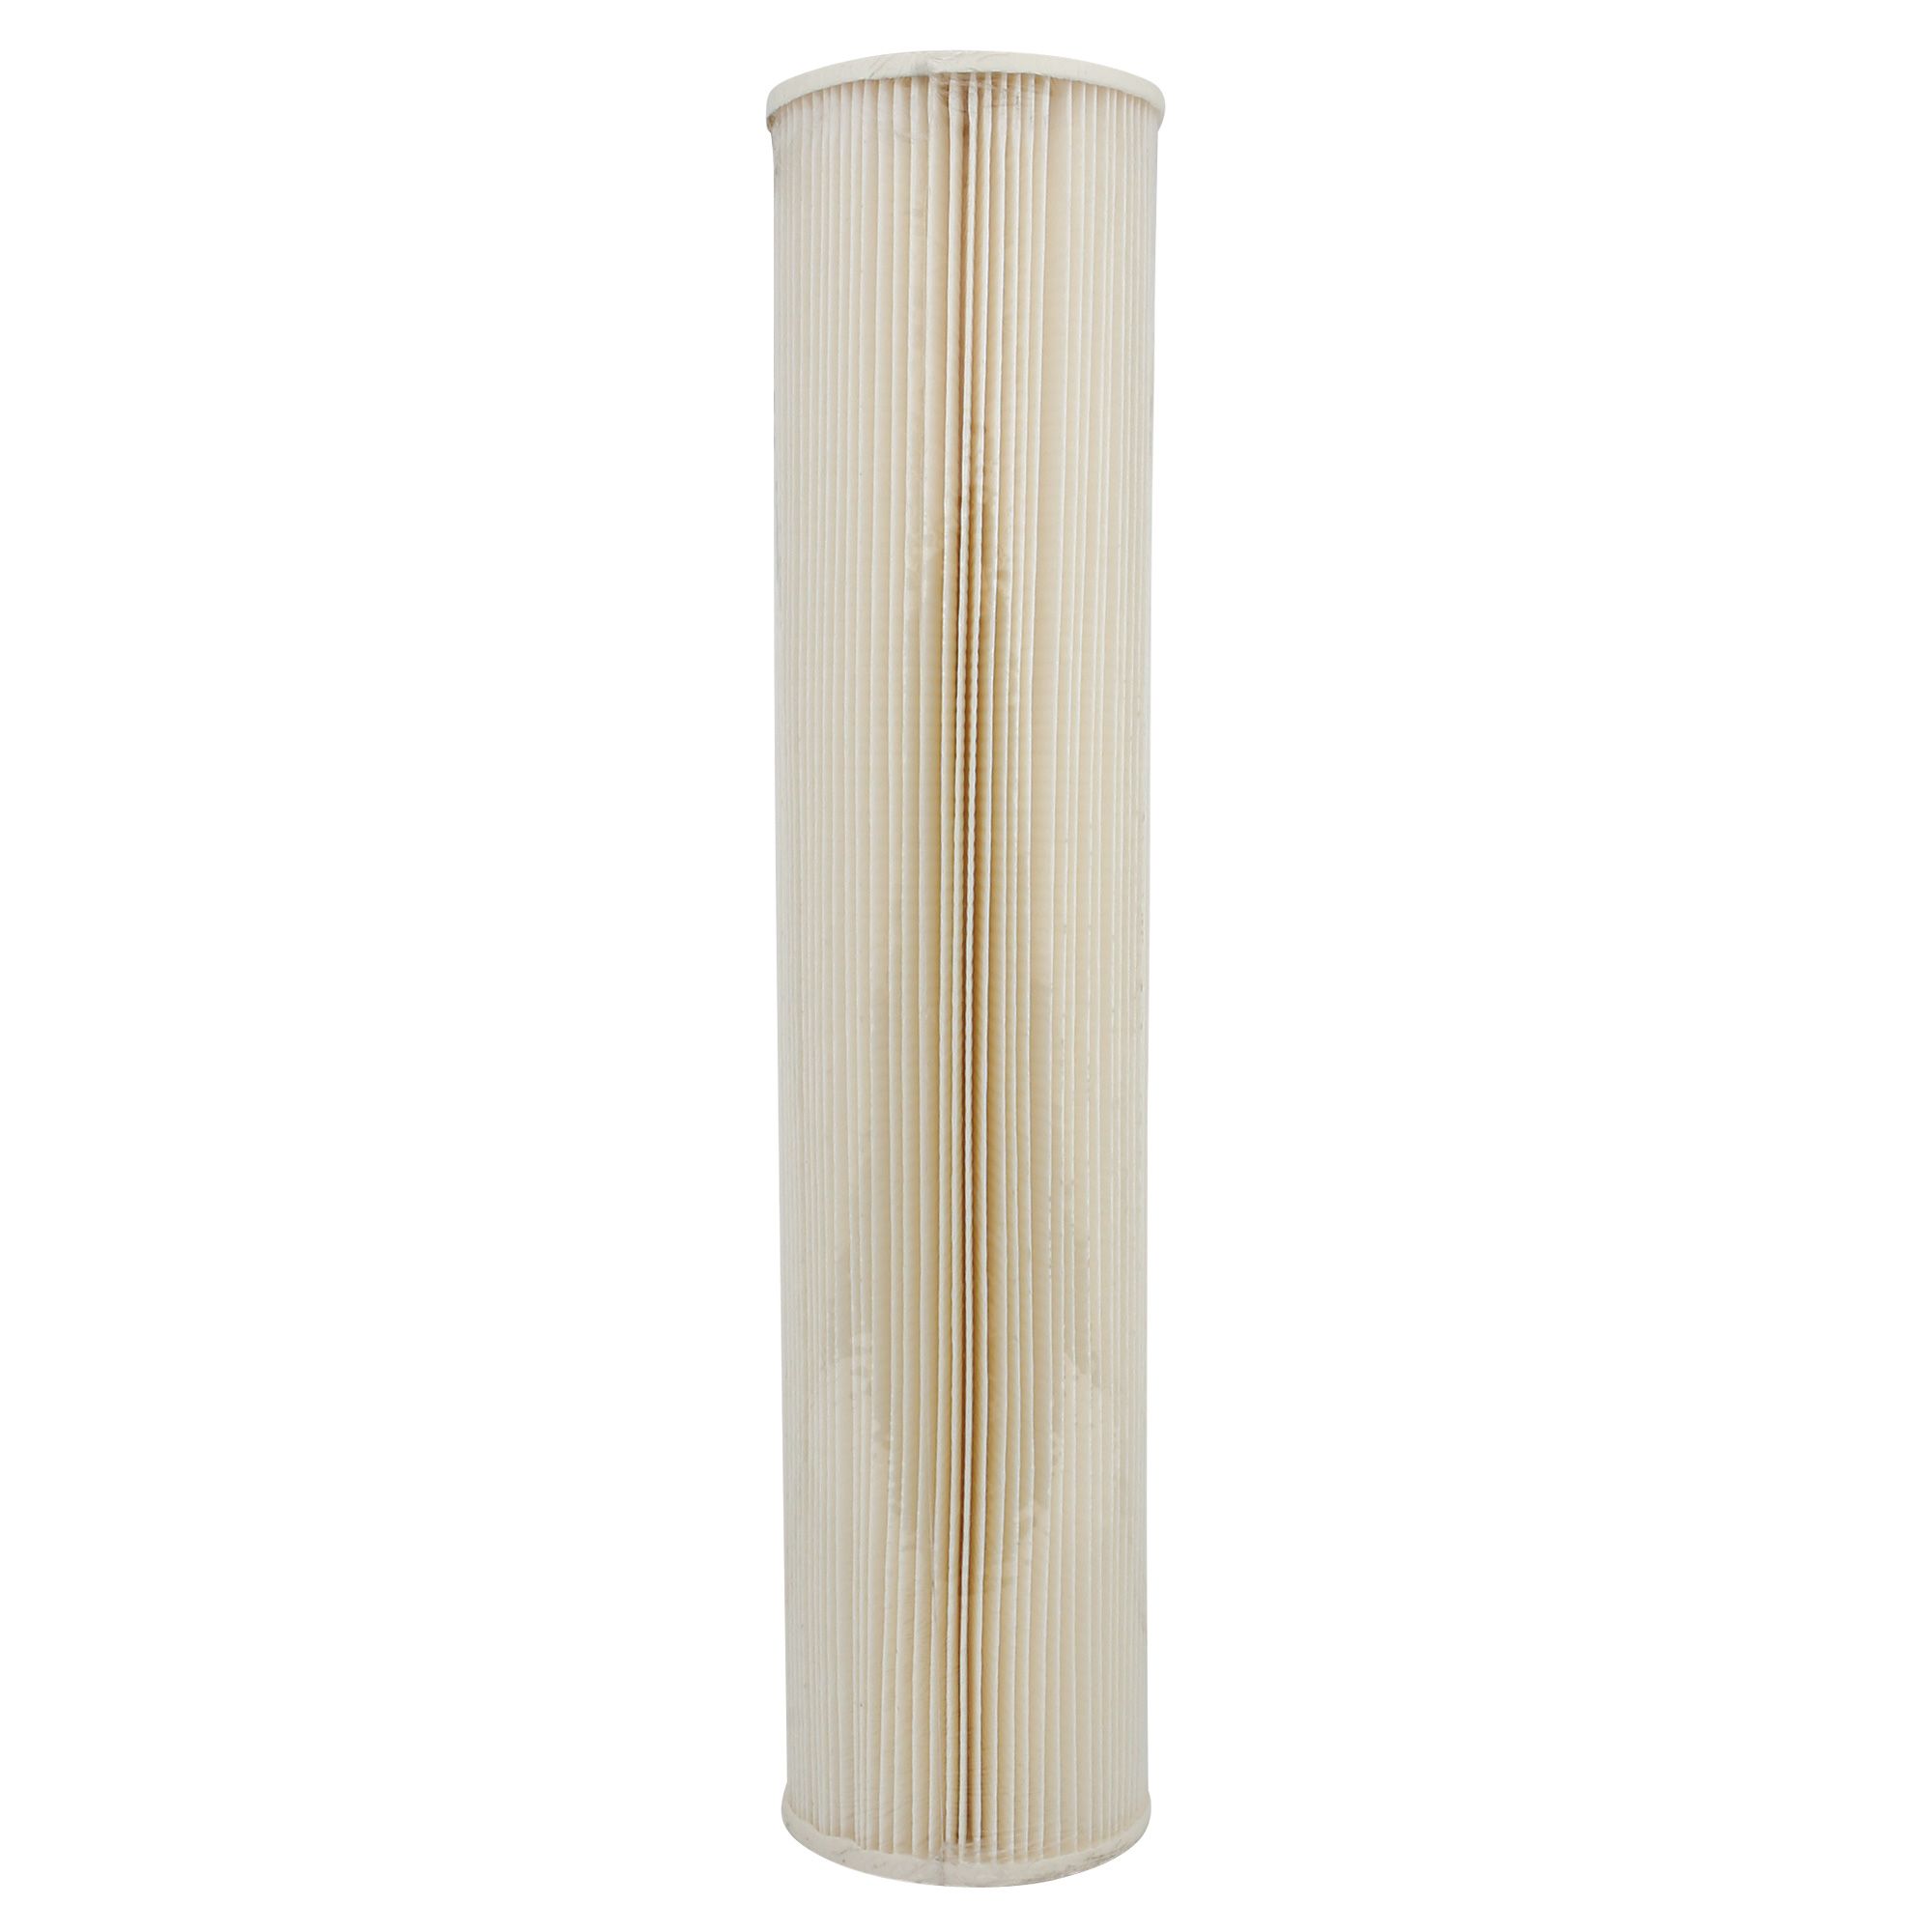 12.75 OD Cellulose/Polyester Blend Filter Media 36 Length Farr 213540-005 OEM Replacement Cartridge Filter 